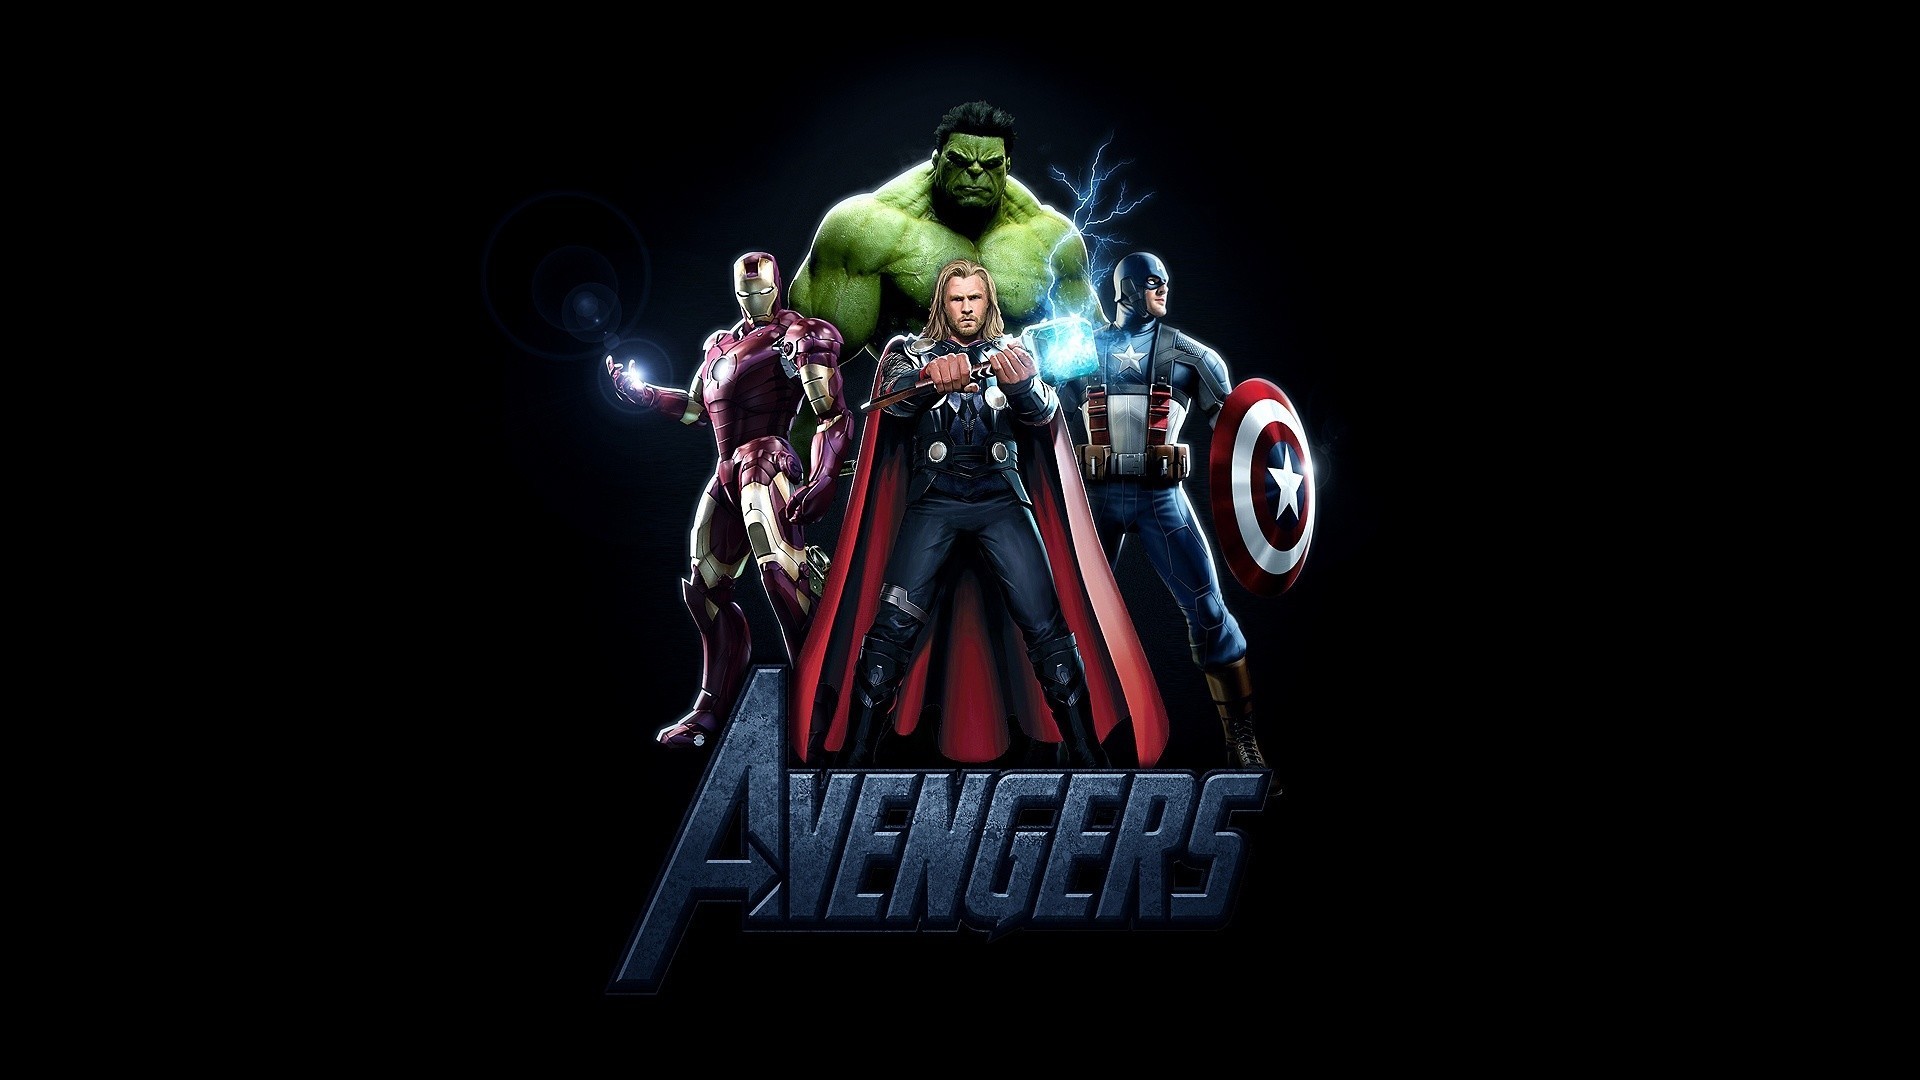 1920x1080 Download free avengers logo wallpapers for your mobile phone by